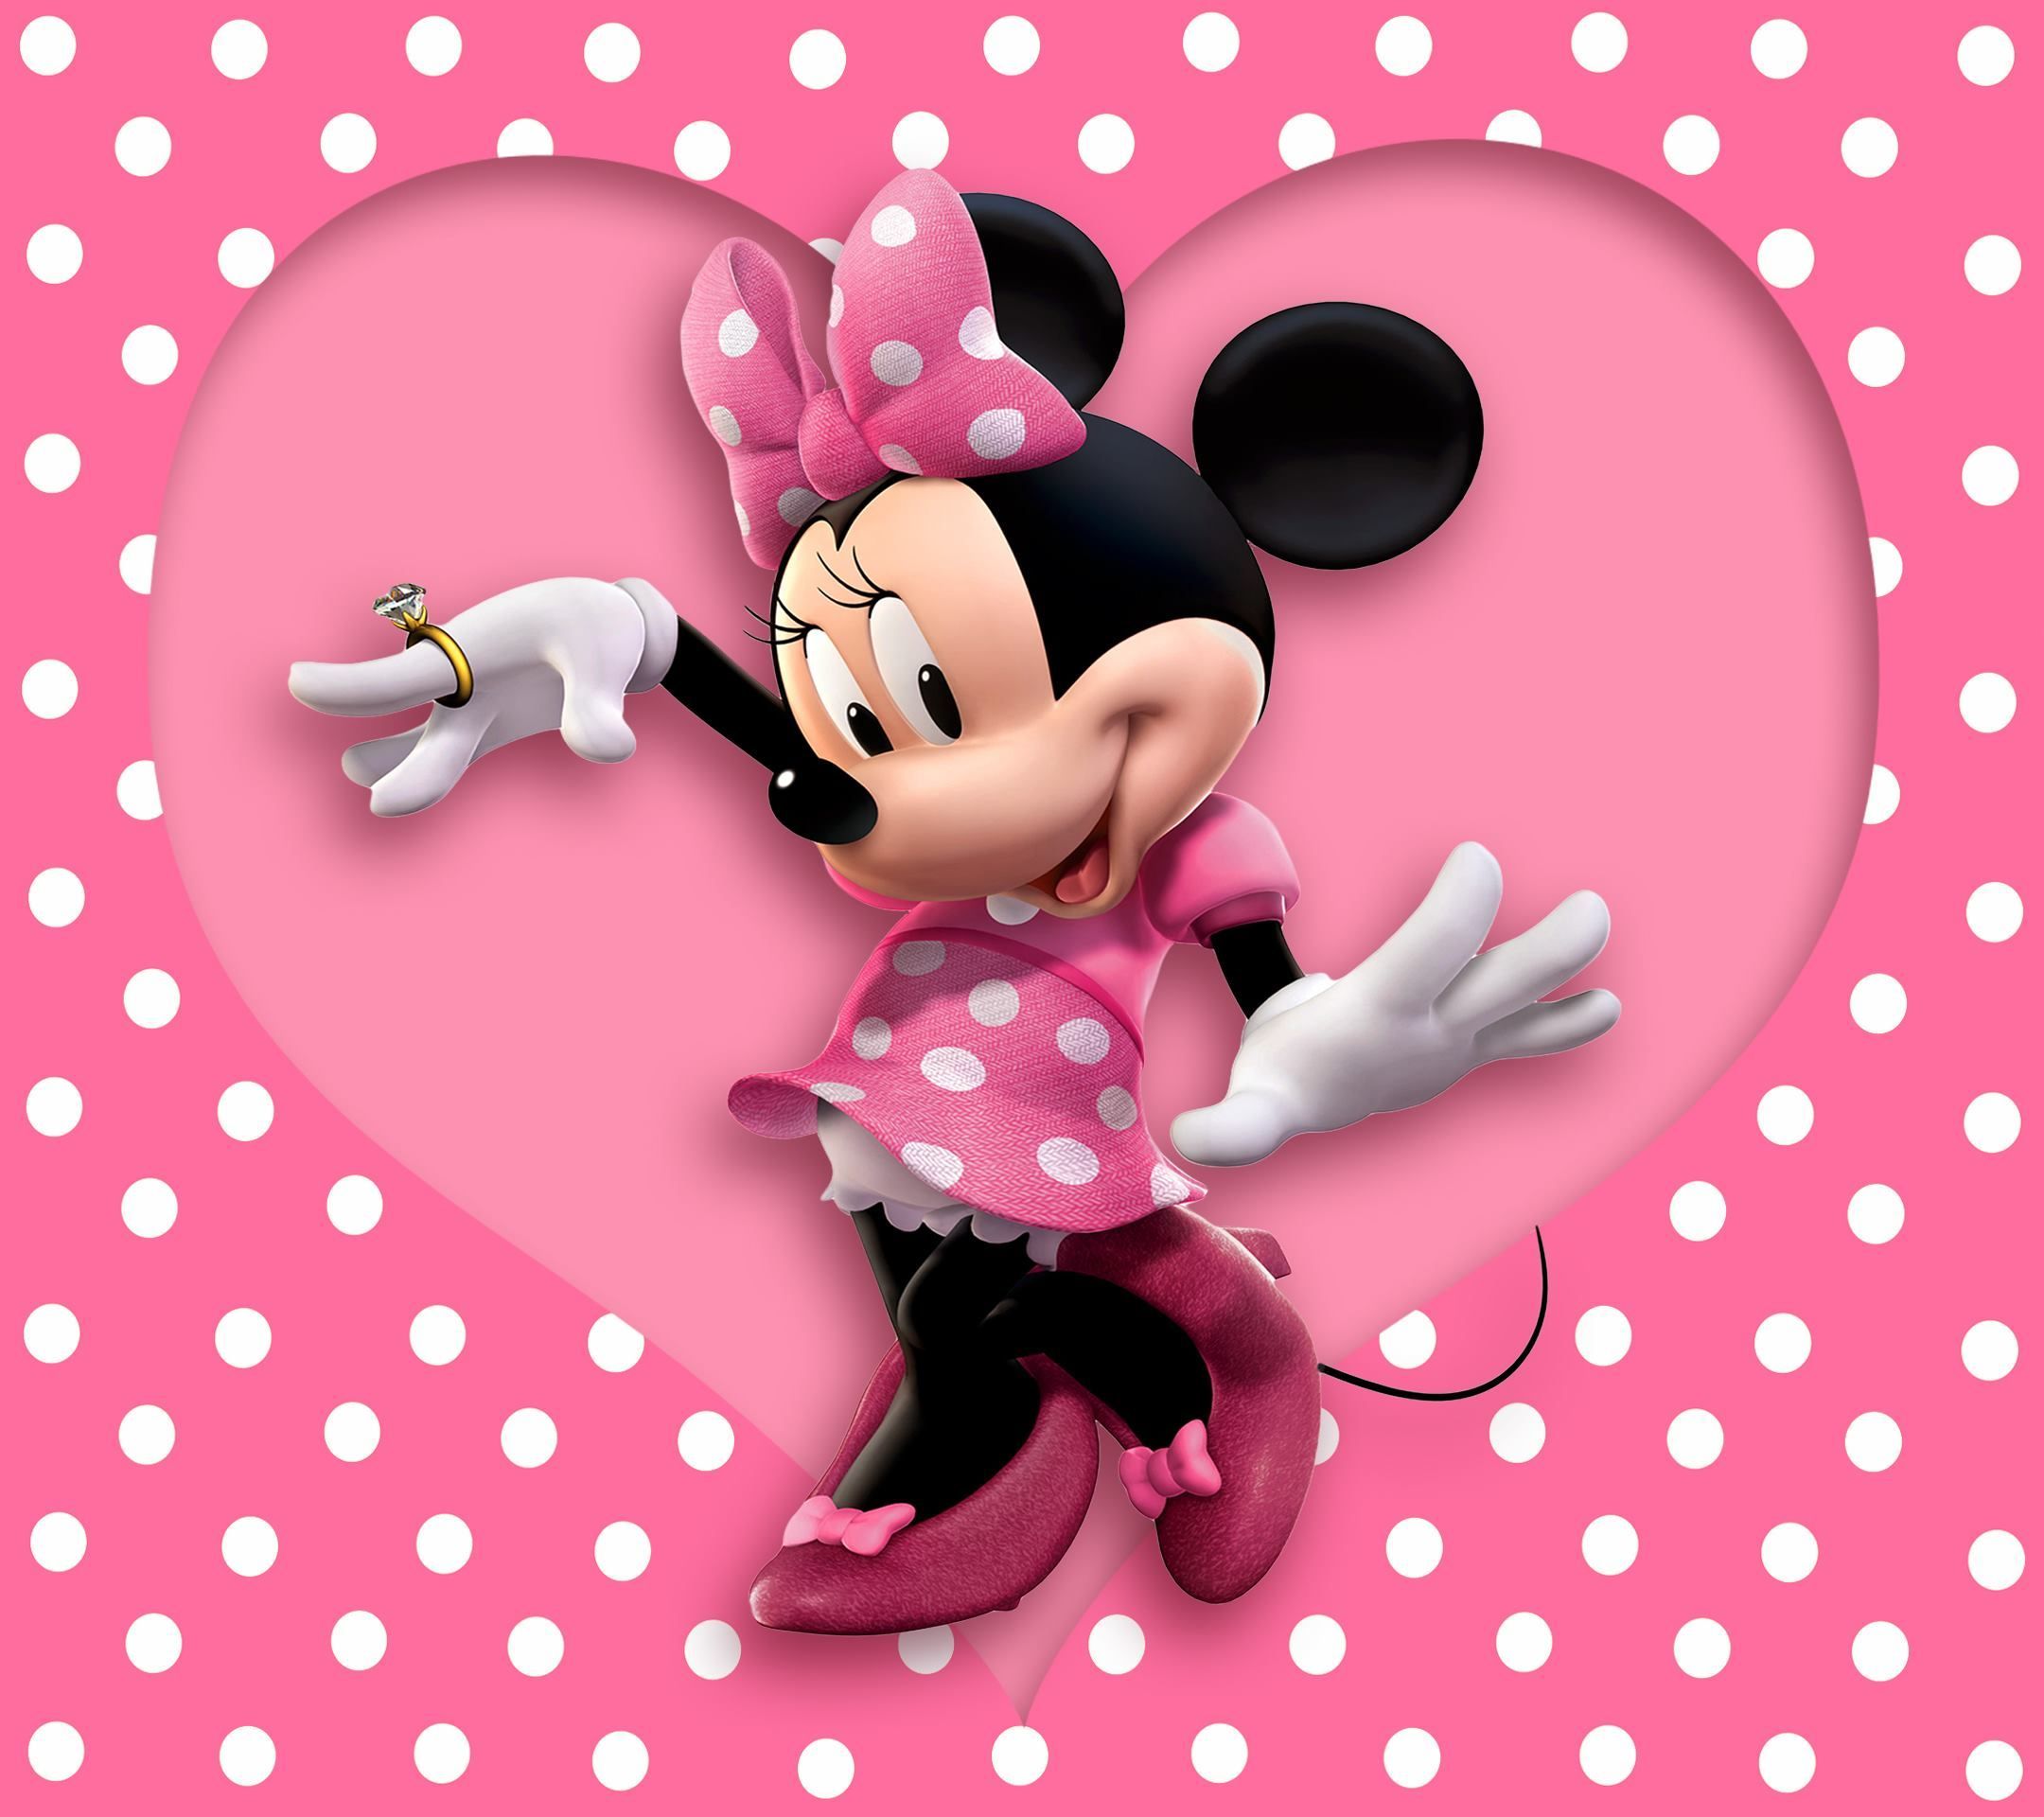 Cute Minnie Mouse Wallpapers